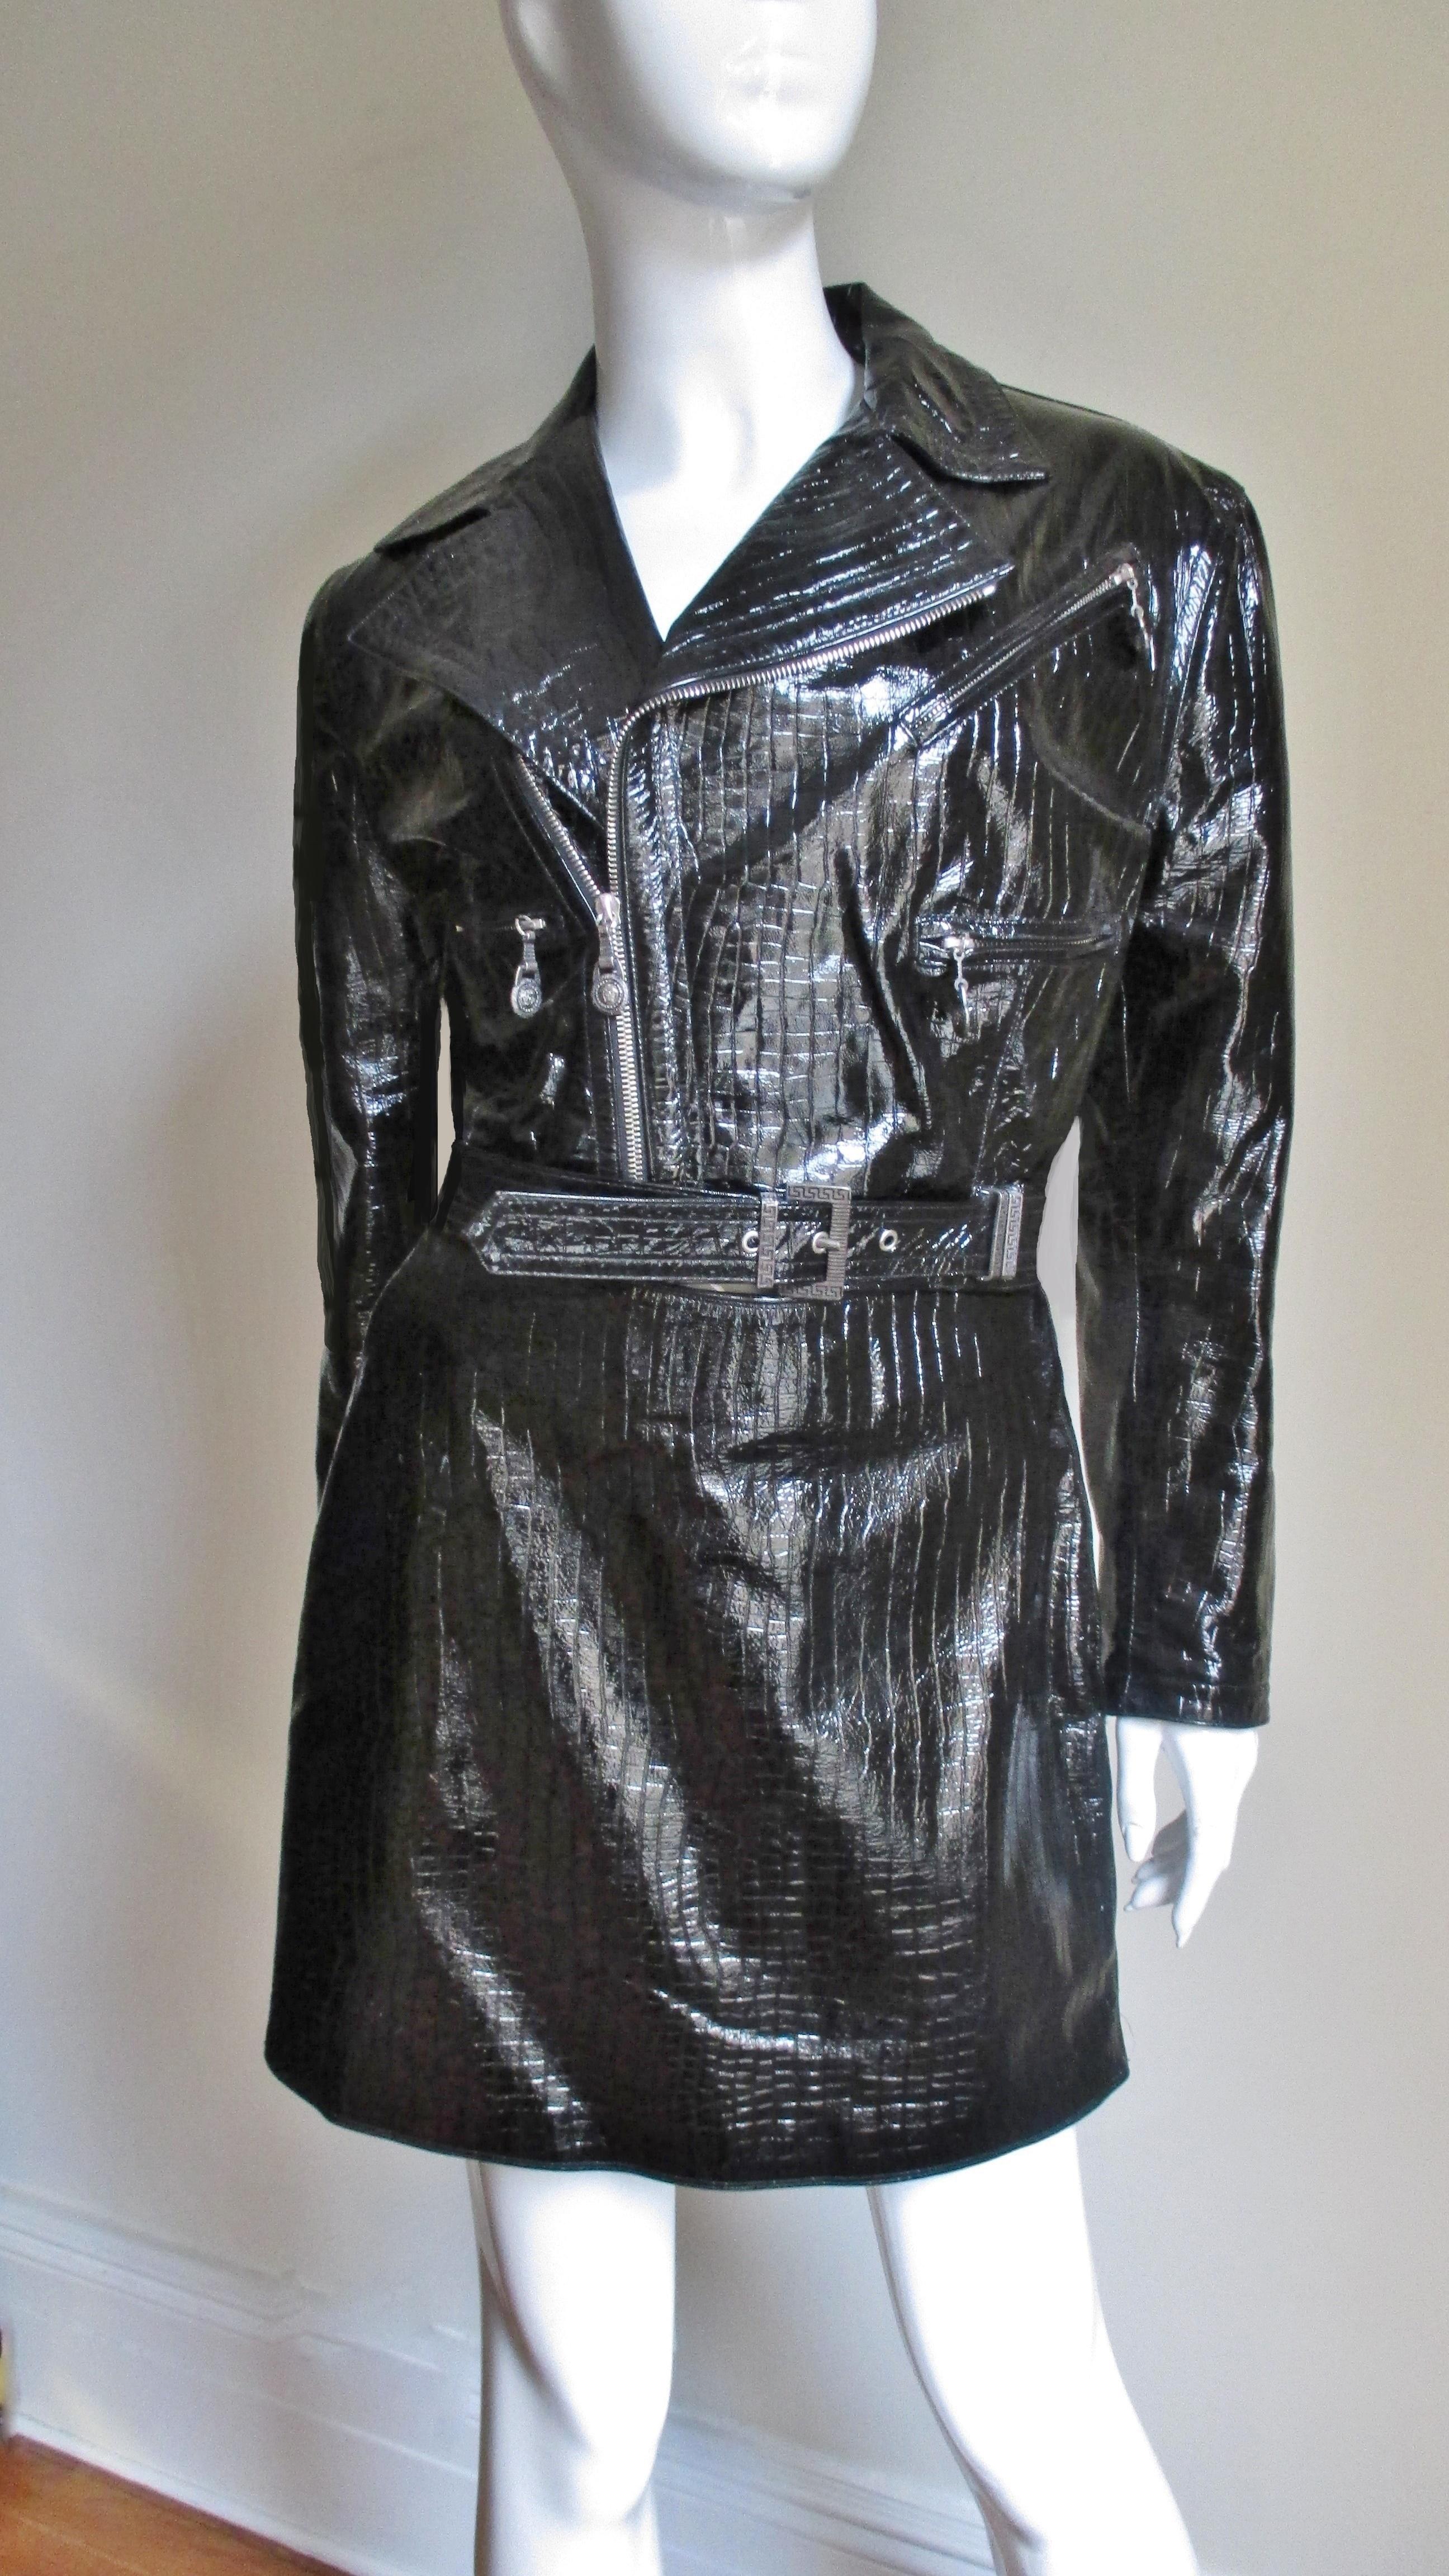 A fabulous 2 piece black leather motorcycle jacket with matching  skirt set from Gianni Versace's FW 1994 collection which are becoming increasingly rare. The jacket contains all of Versace's impeccable attention to detail including Medusa head